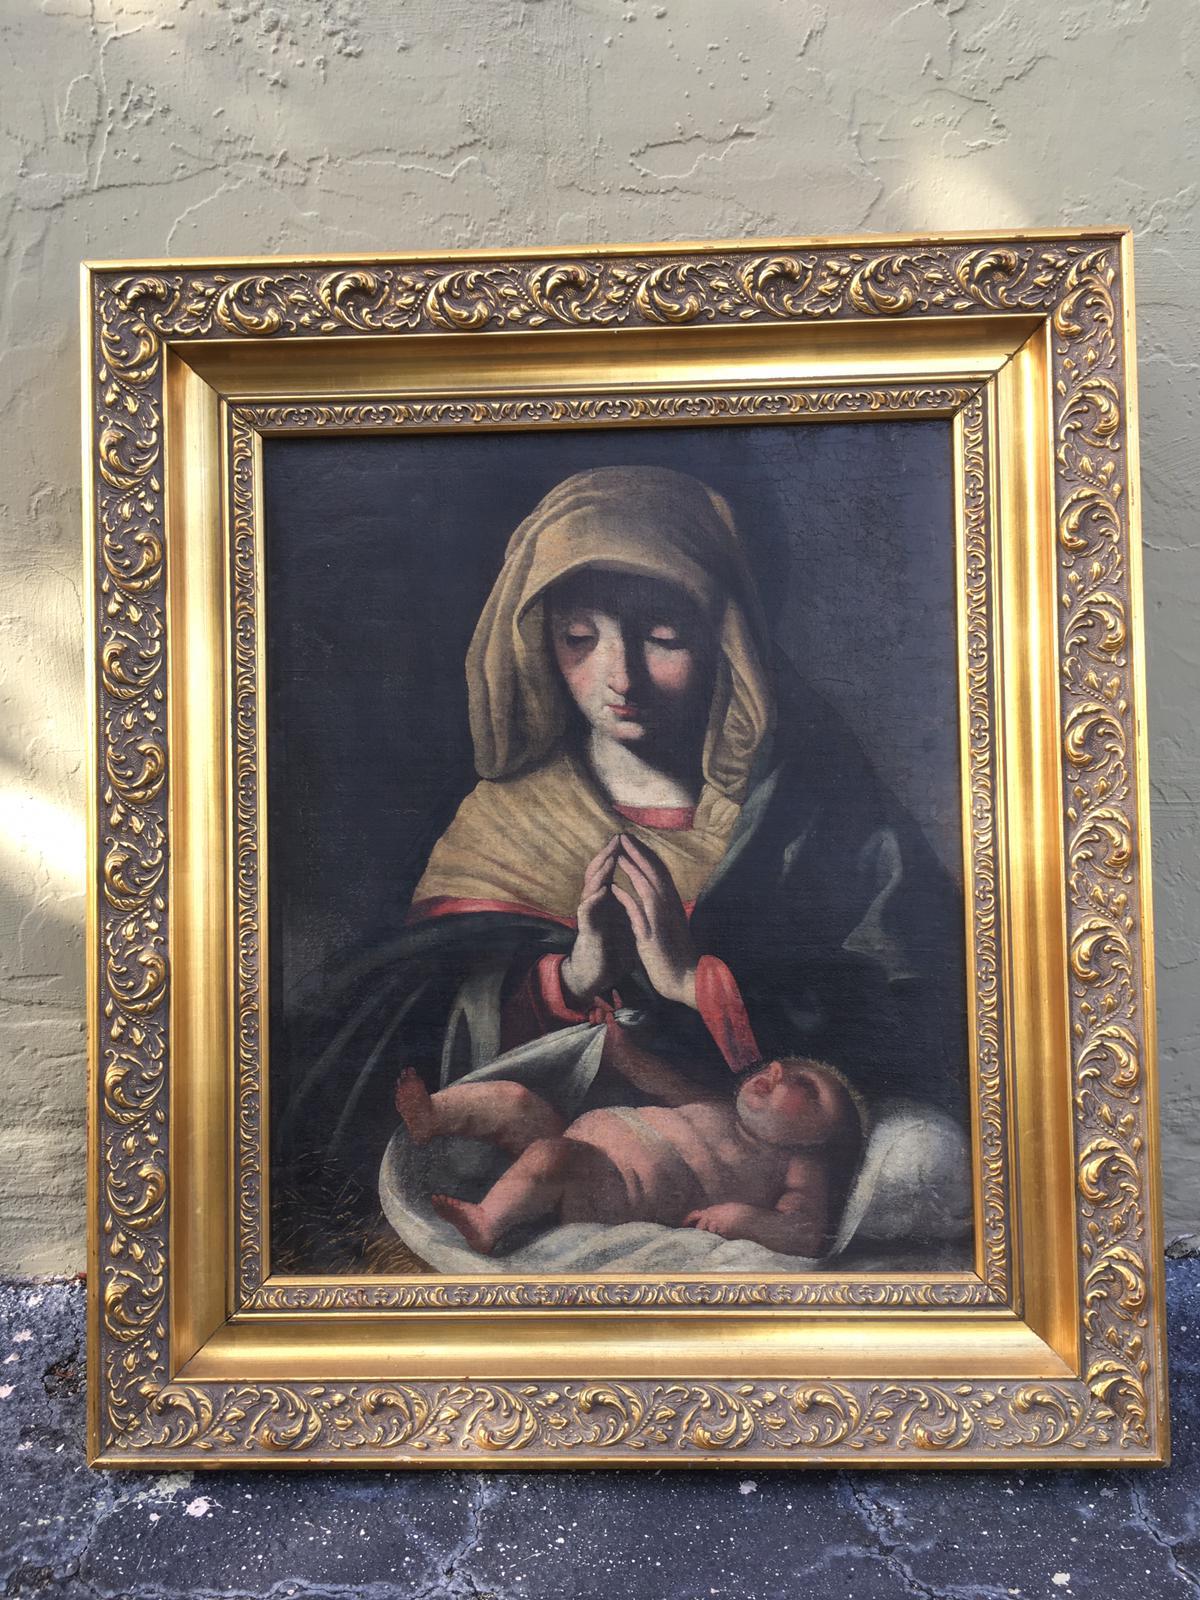 Madonna and child, Classical 19th century painting.
This lovely oil painting was purchased in Spain.
The artist is unknown.
The painting still maintains its original finish and has not been re-touched.
The wood frame shows well.